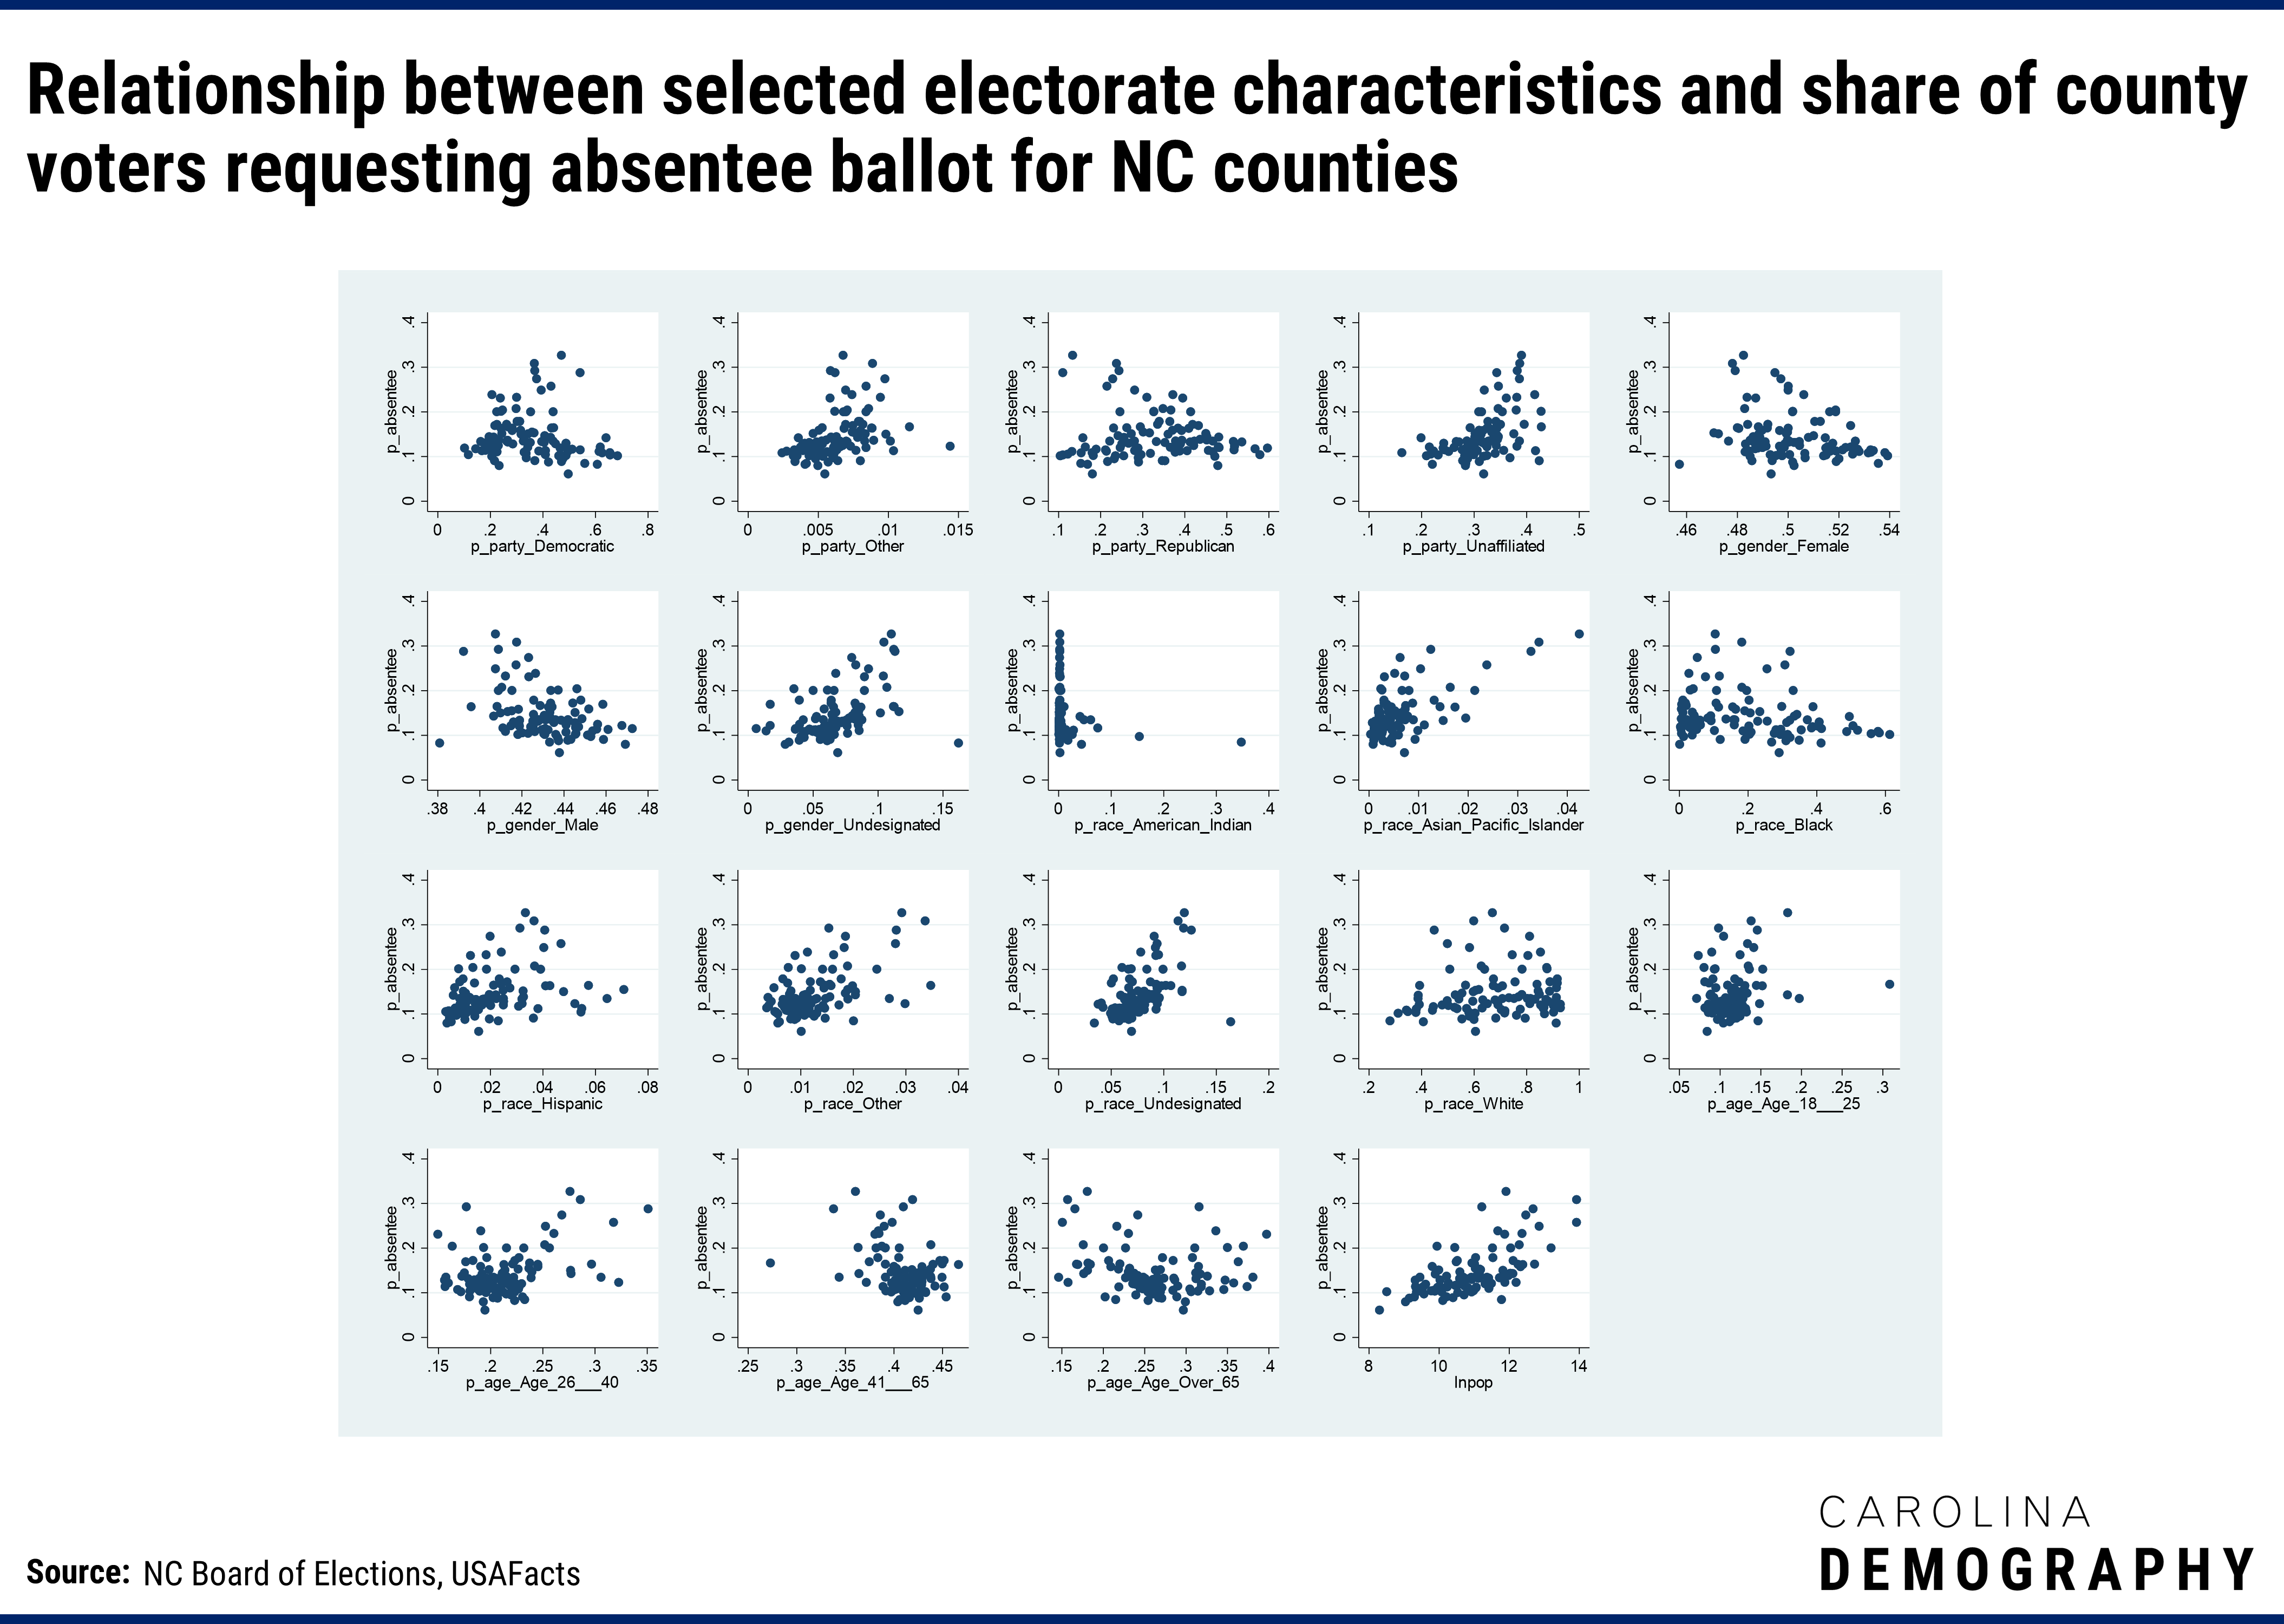 Multiple scatter plots showing the Relationship between selected electorate characteristics and share of county voters requesting absentee ballot for NC counties 